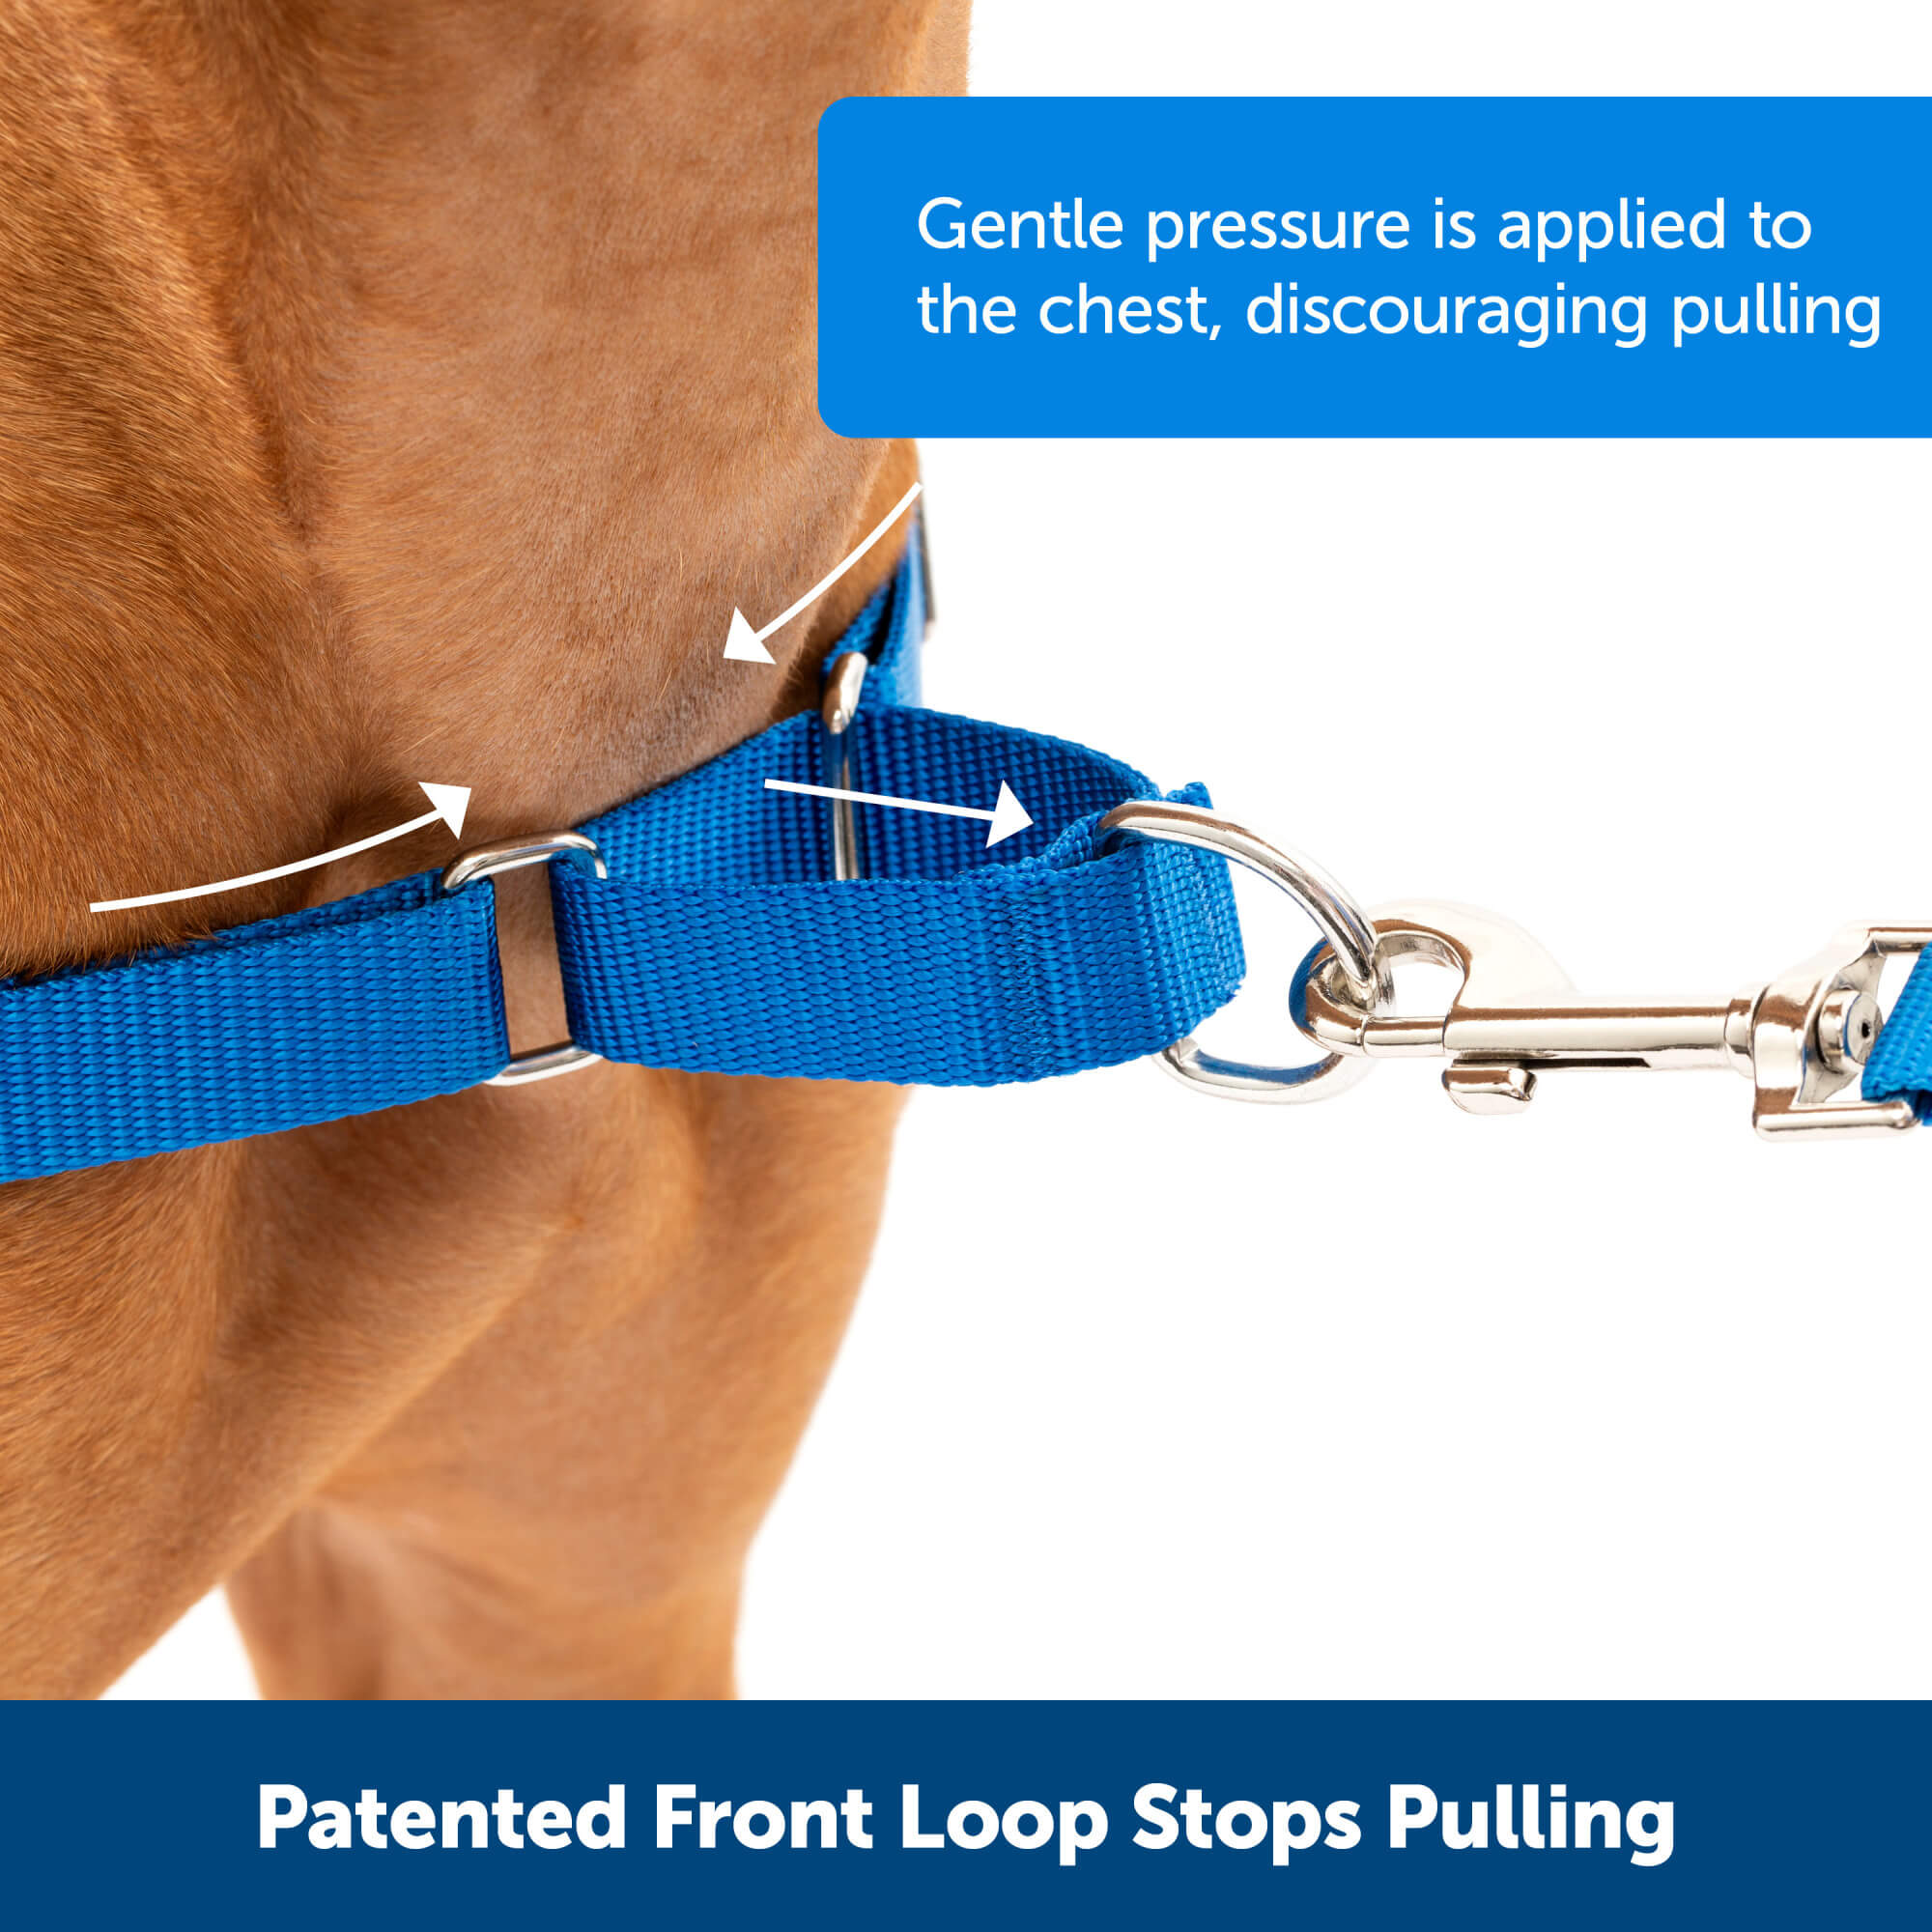 Patented Easy Walk Harness front loop stops pulling